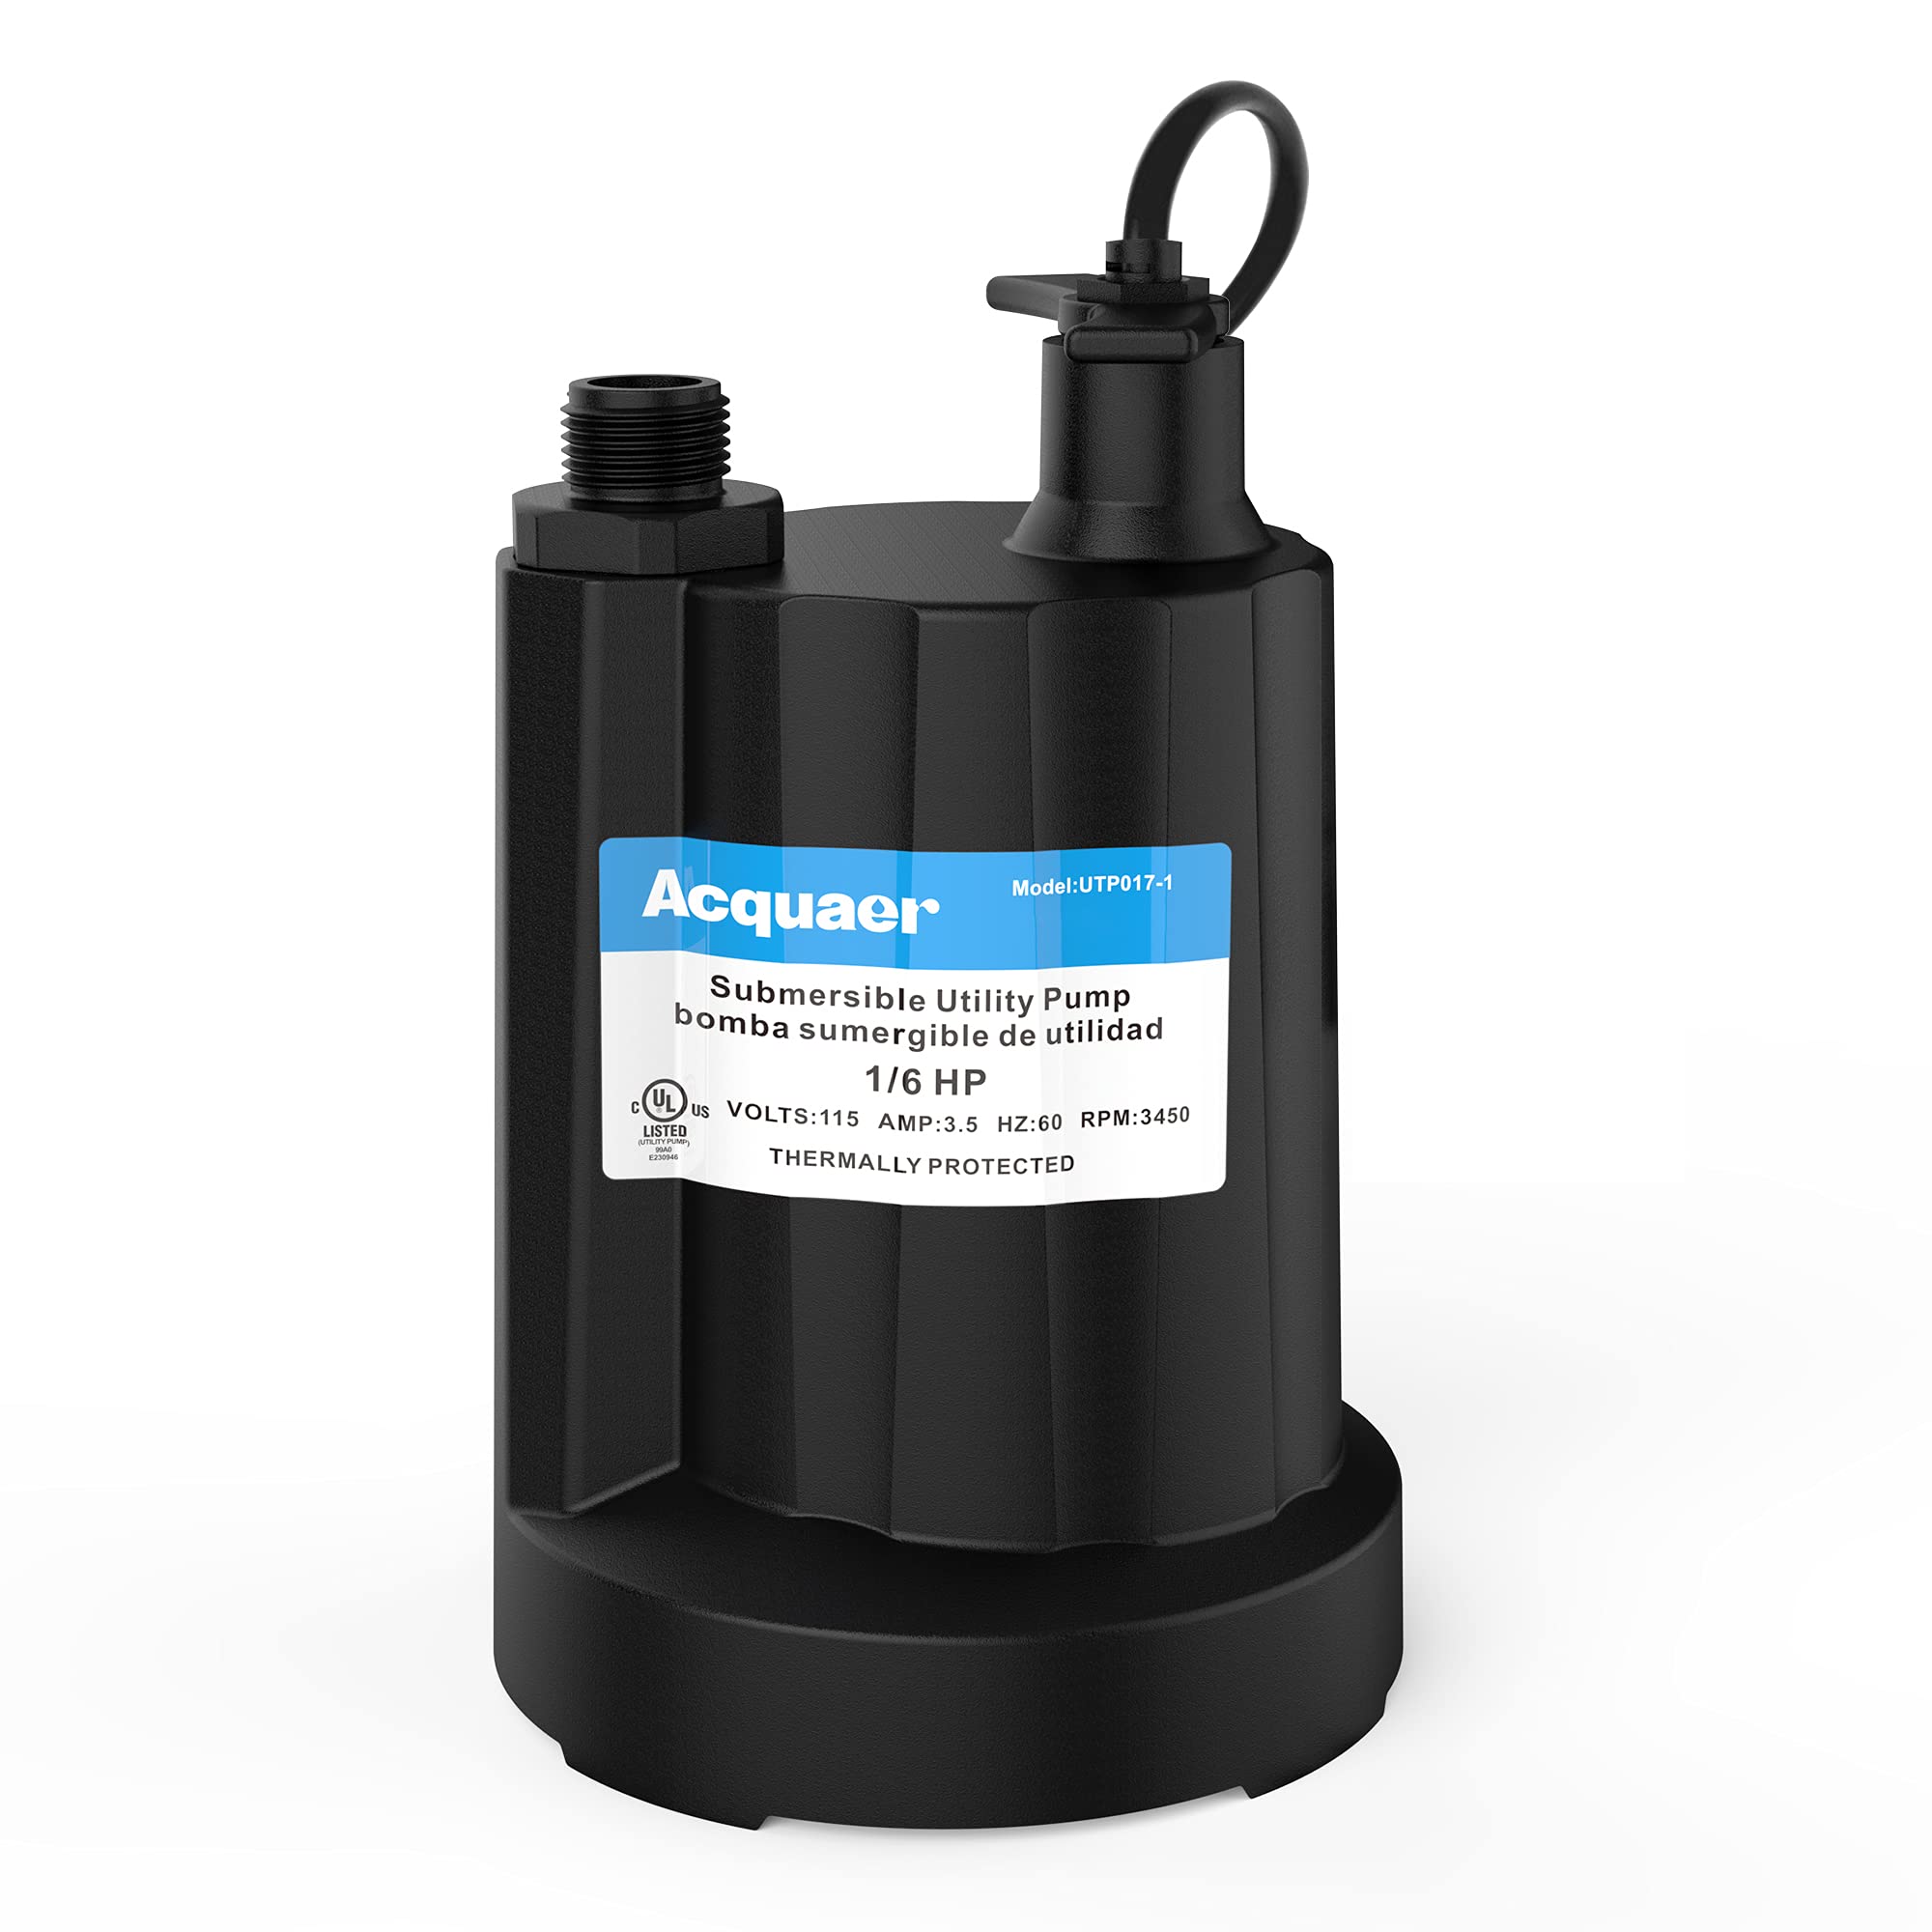 Acquaer Submersible Water Pump 1/6 HP, 1750 GPH with 10 ft Cord - Acquaer